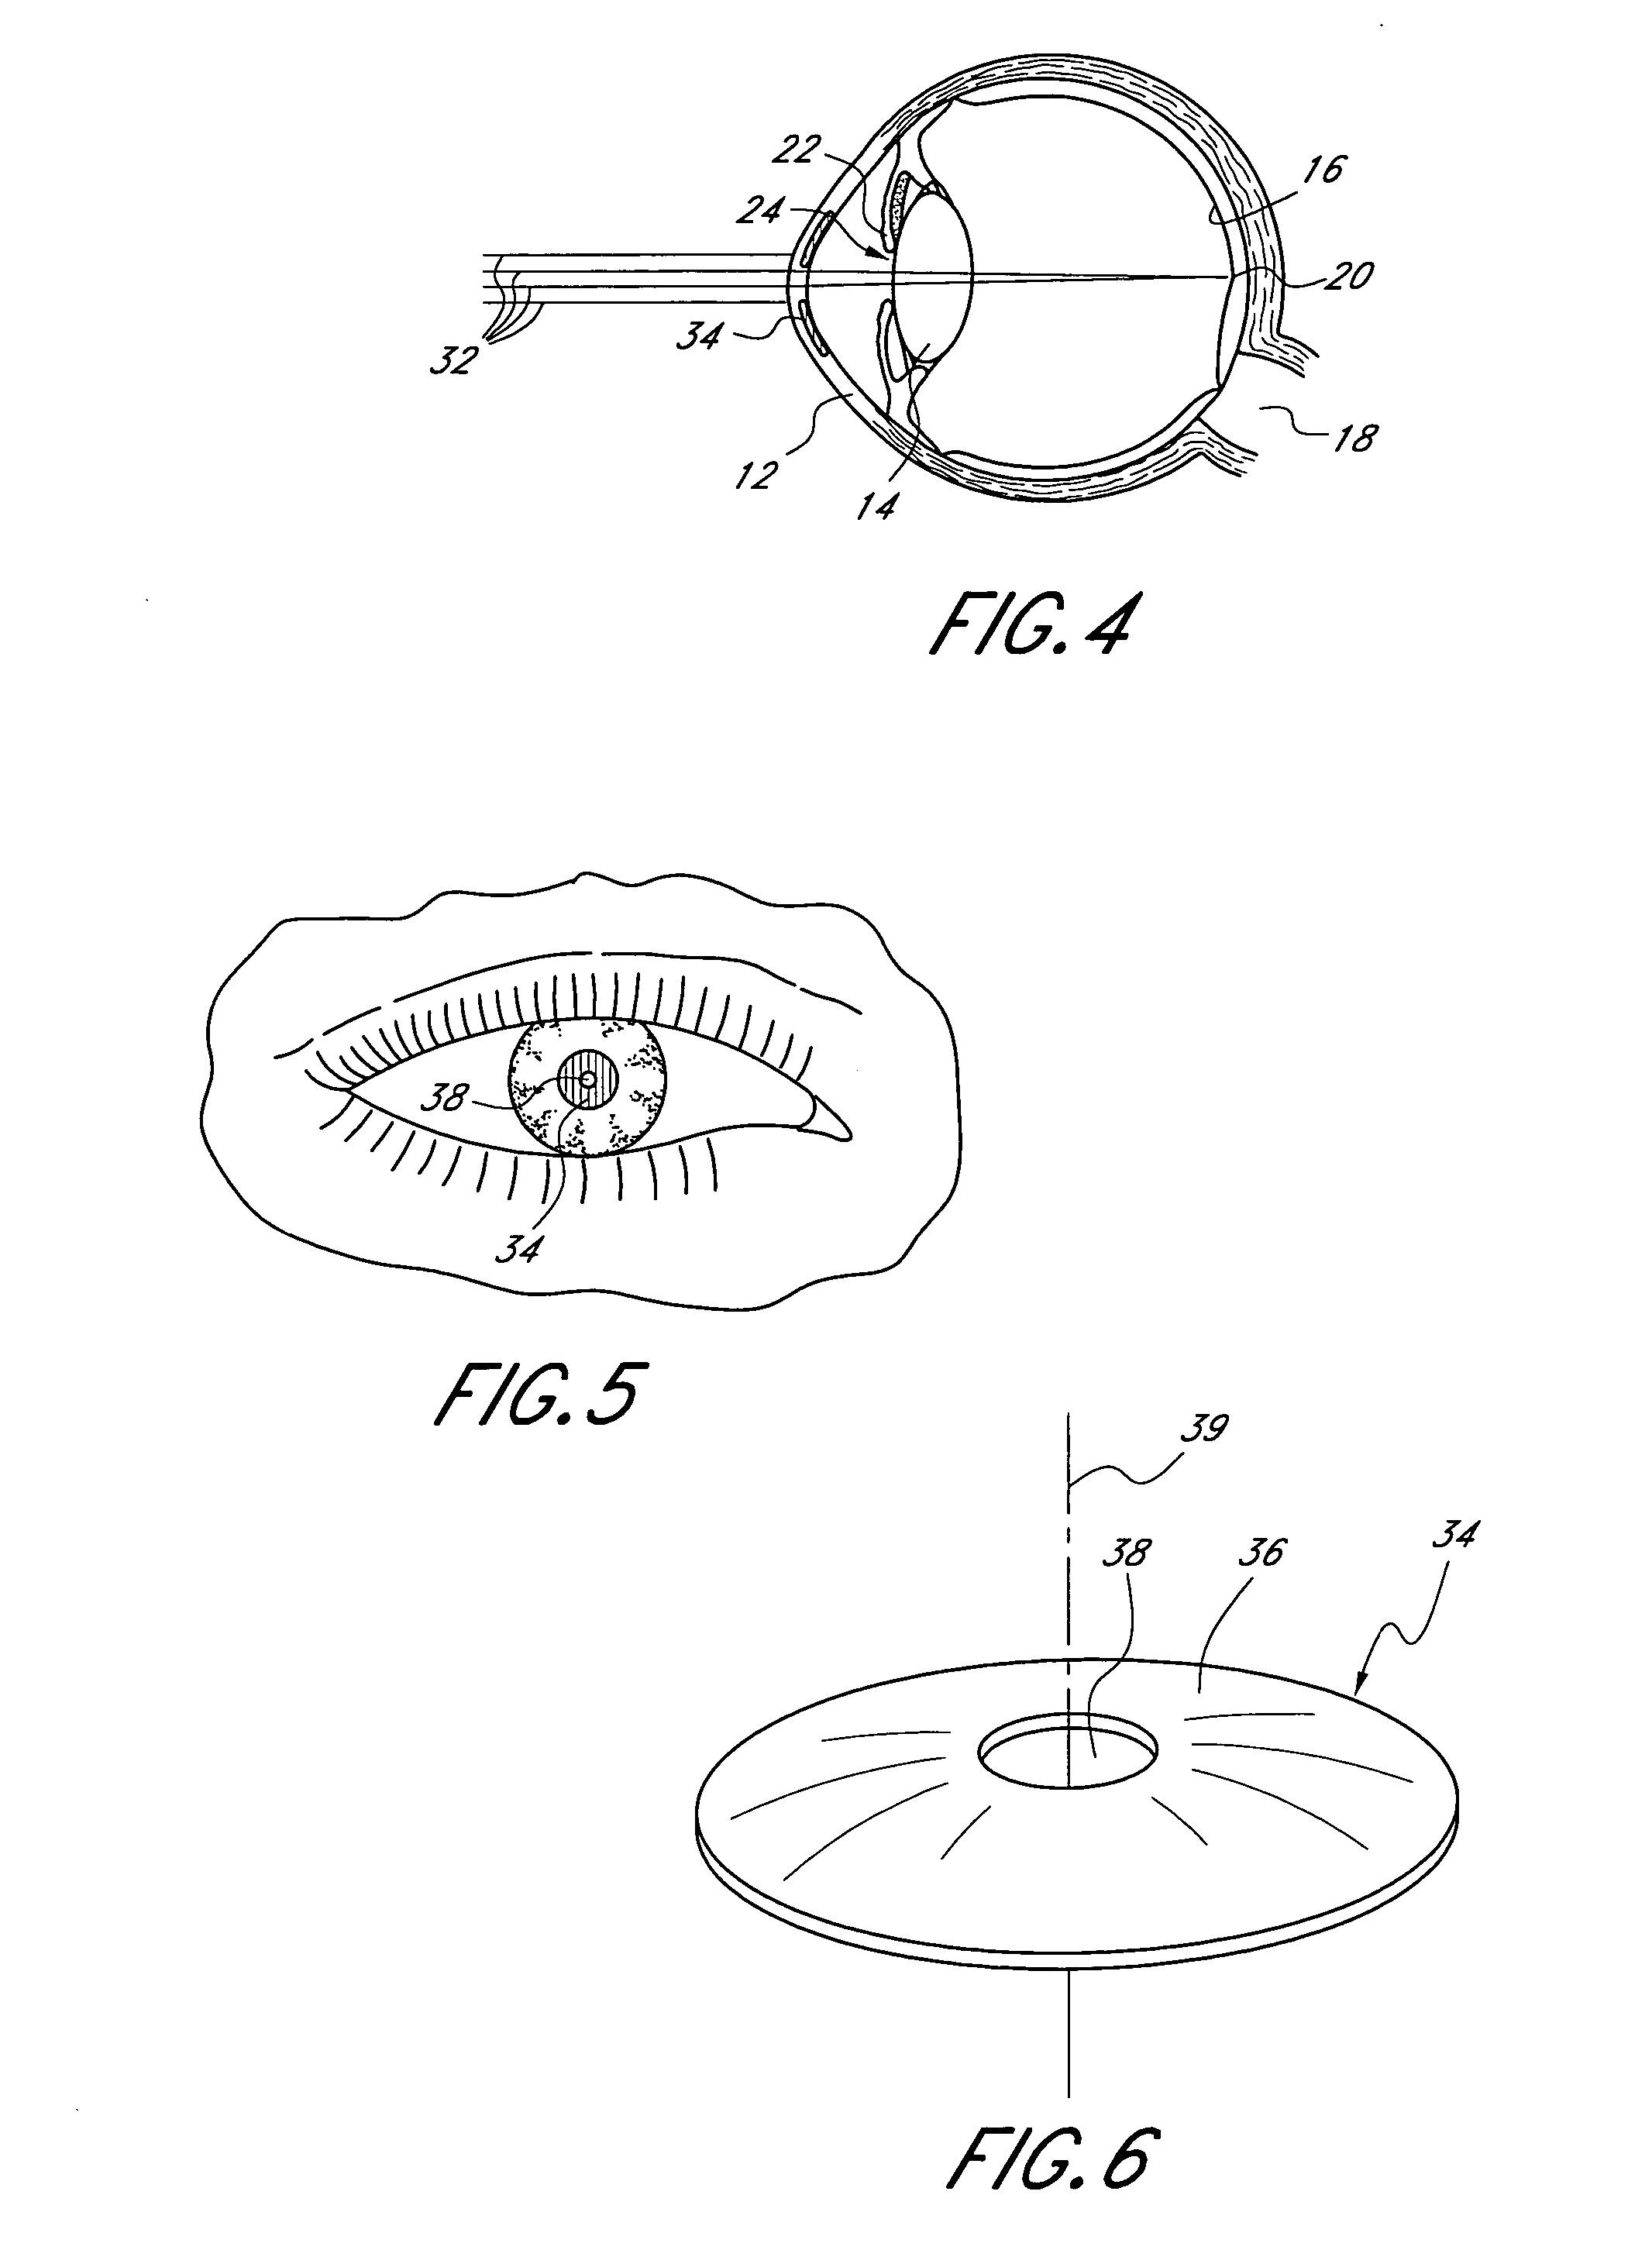 Mask configured to maintain nutrient transport without producing visible diffraction patterns